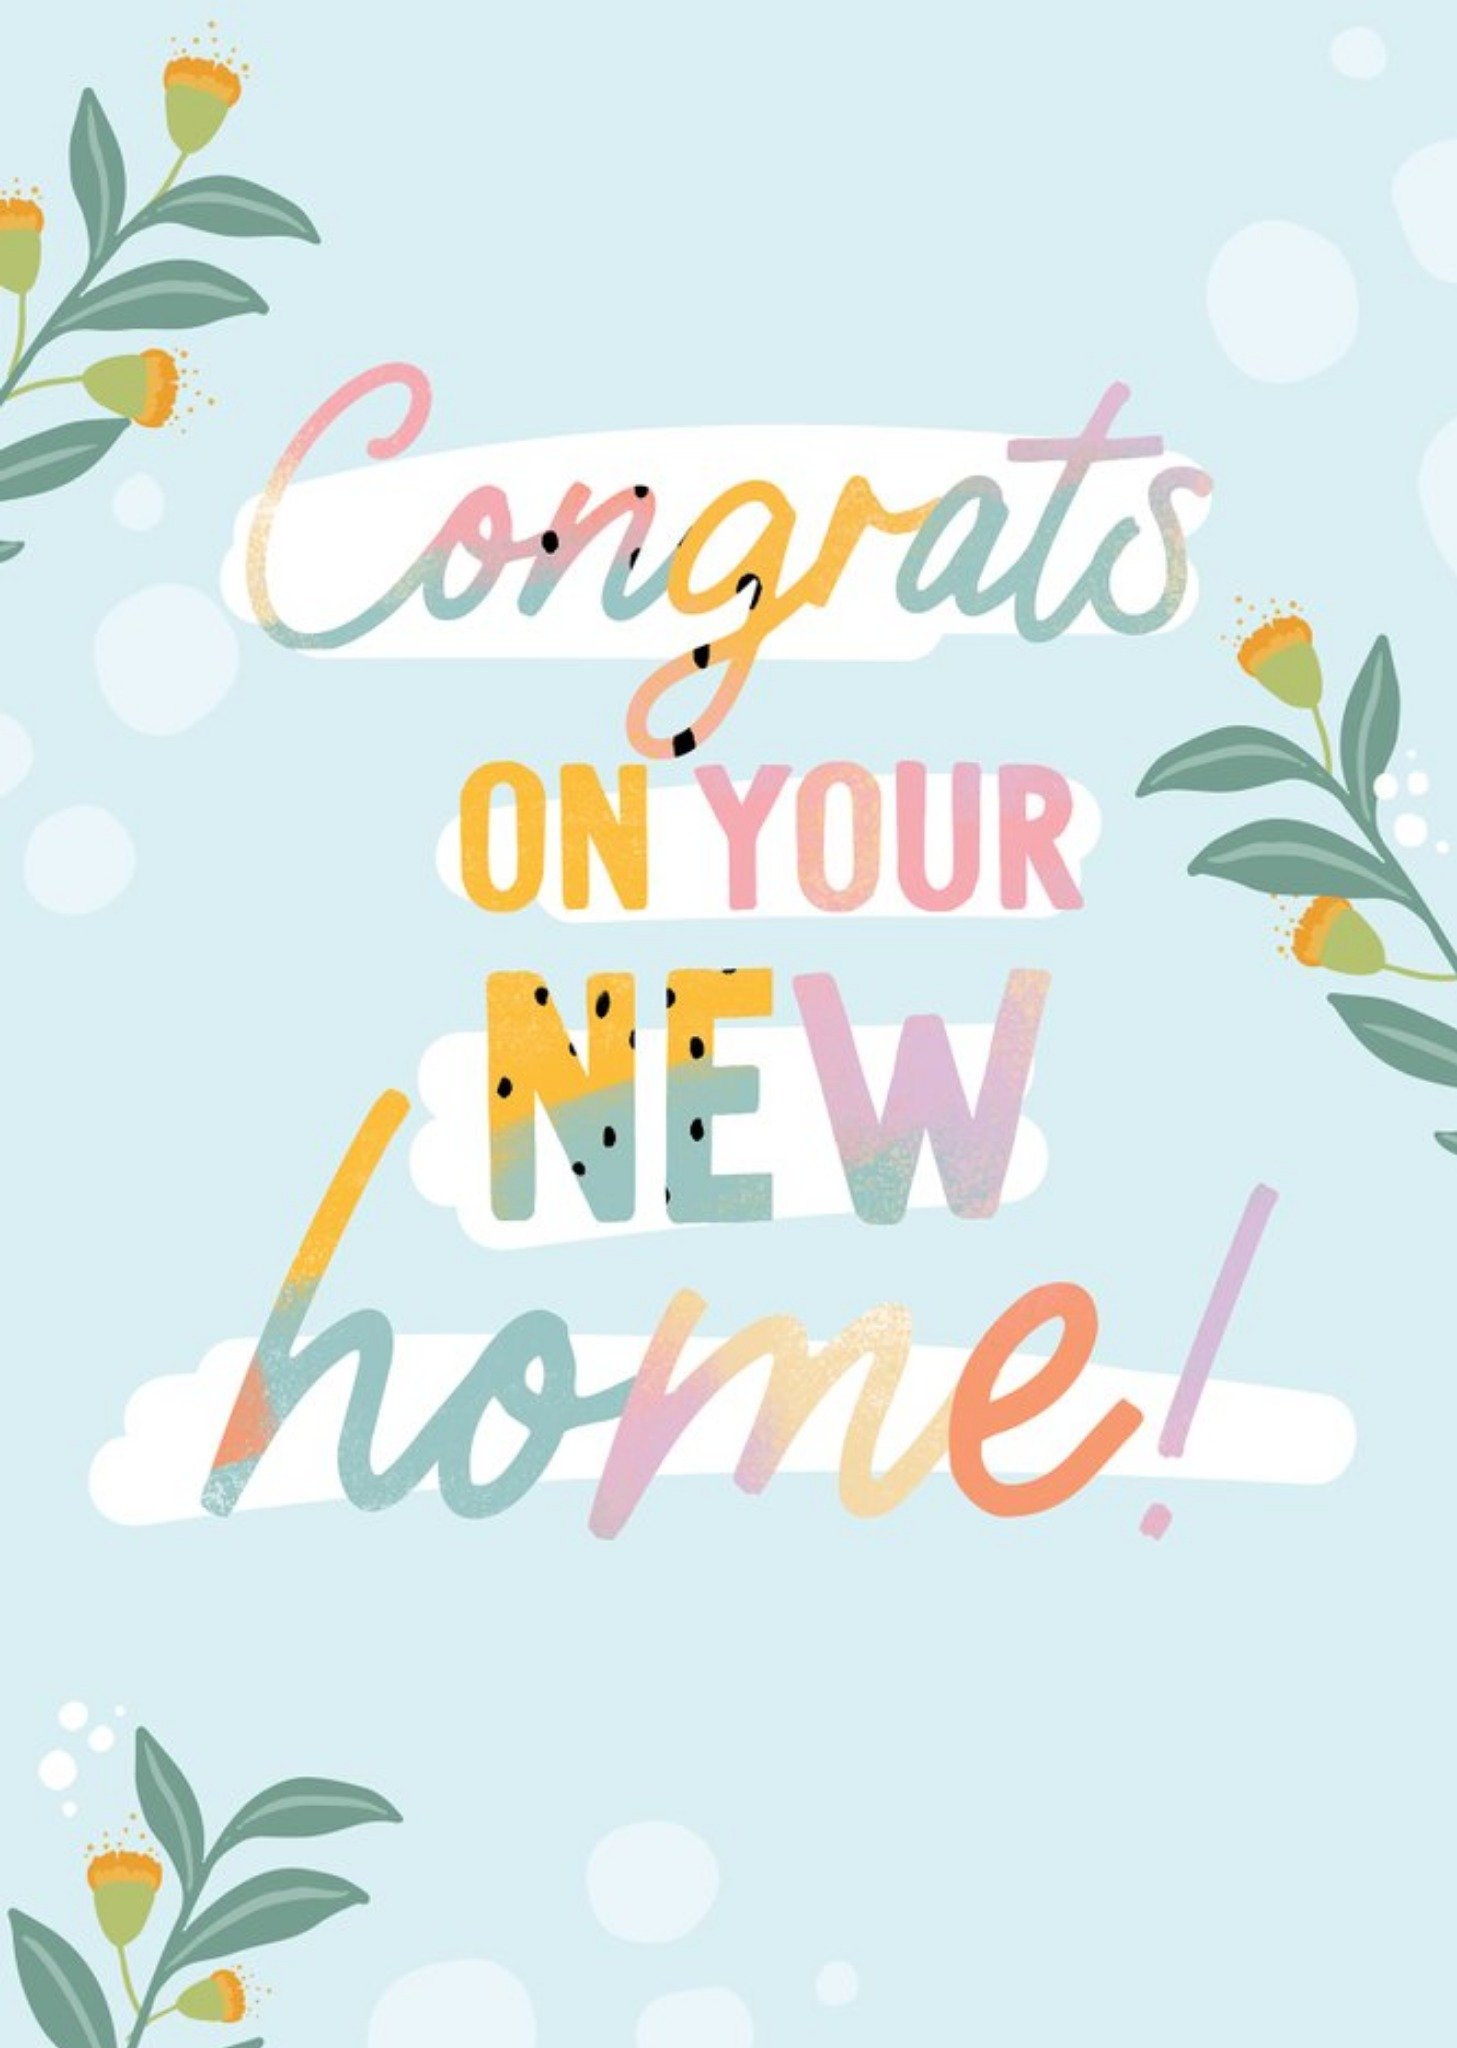 Moonpig Christie Williams Colourful New Home Card, Large